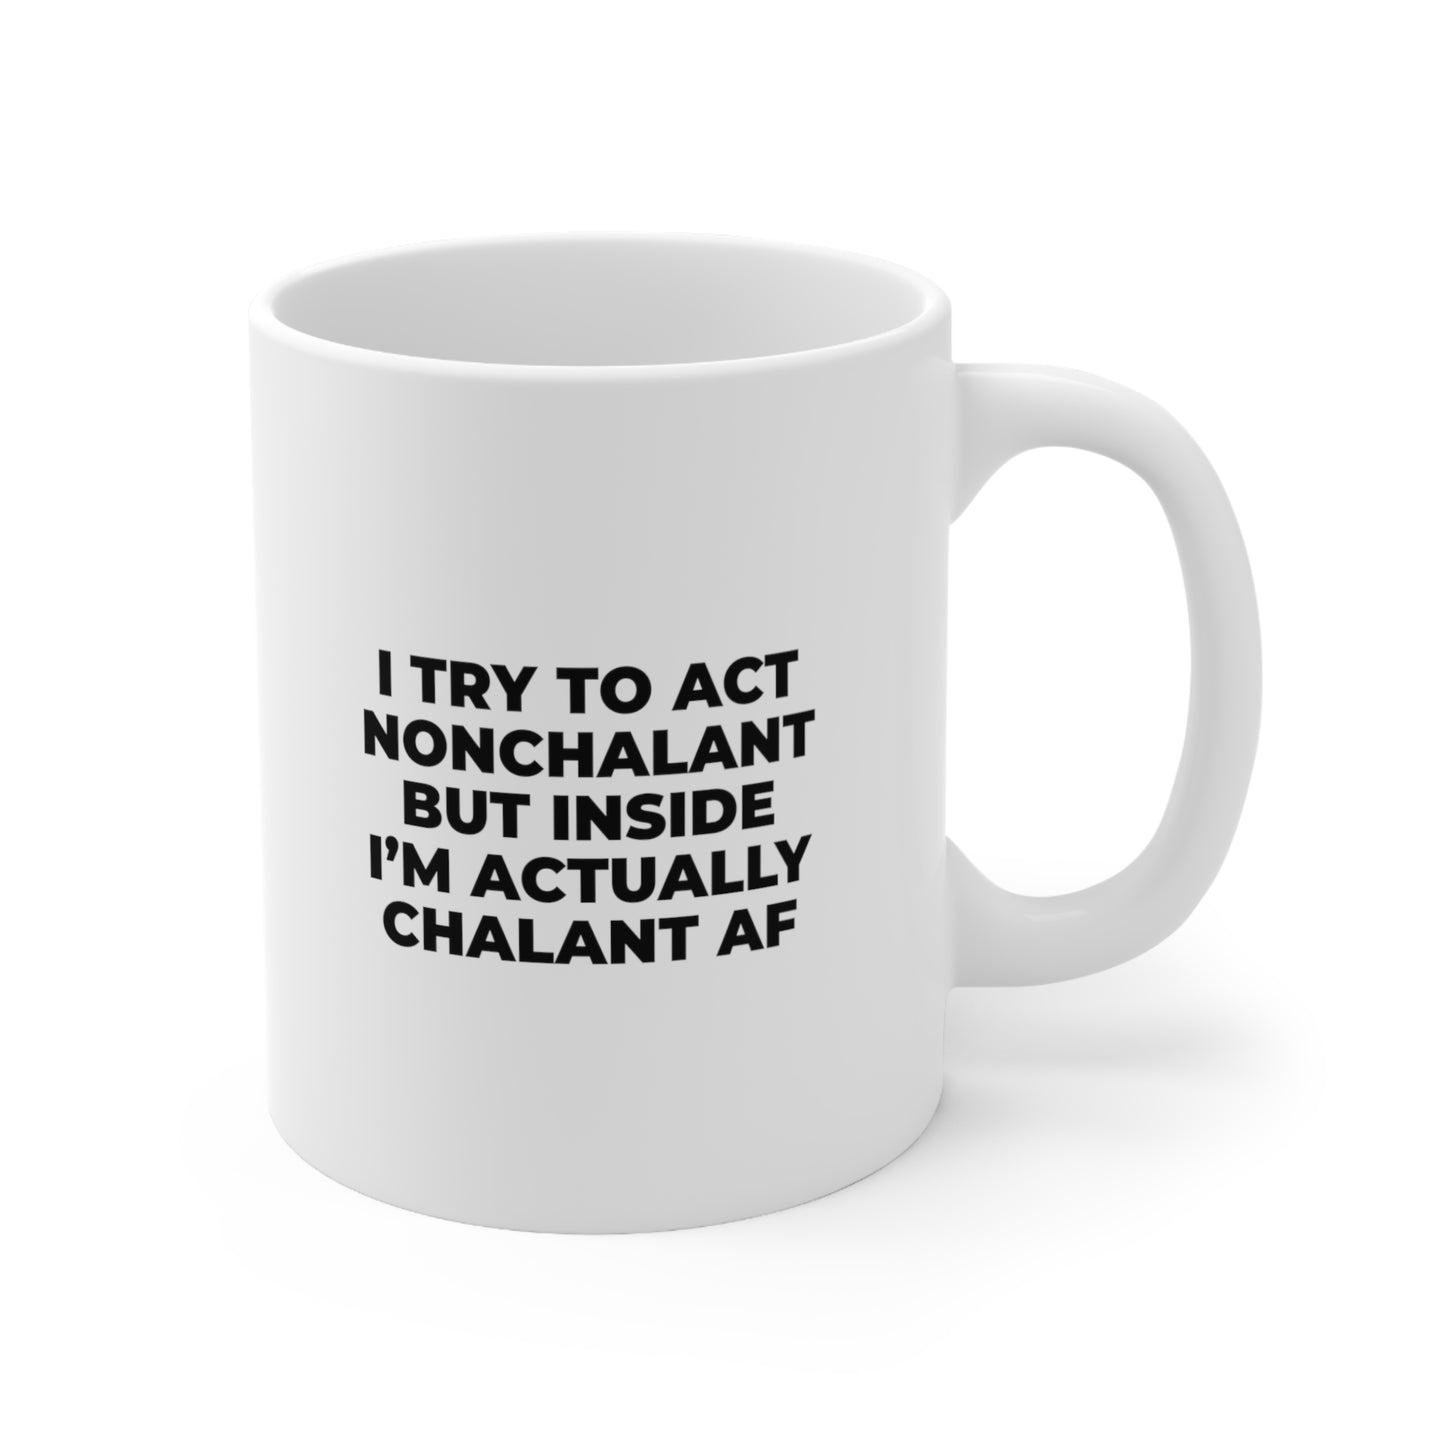 I try to act nonchalant but inside I am actually chalant AF Coffee Mug 11oz